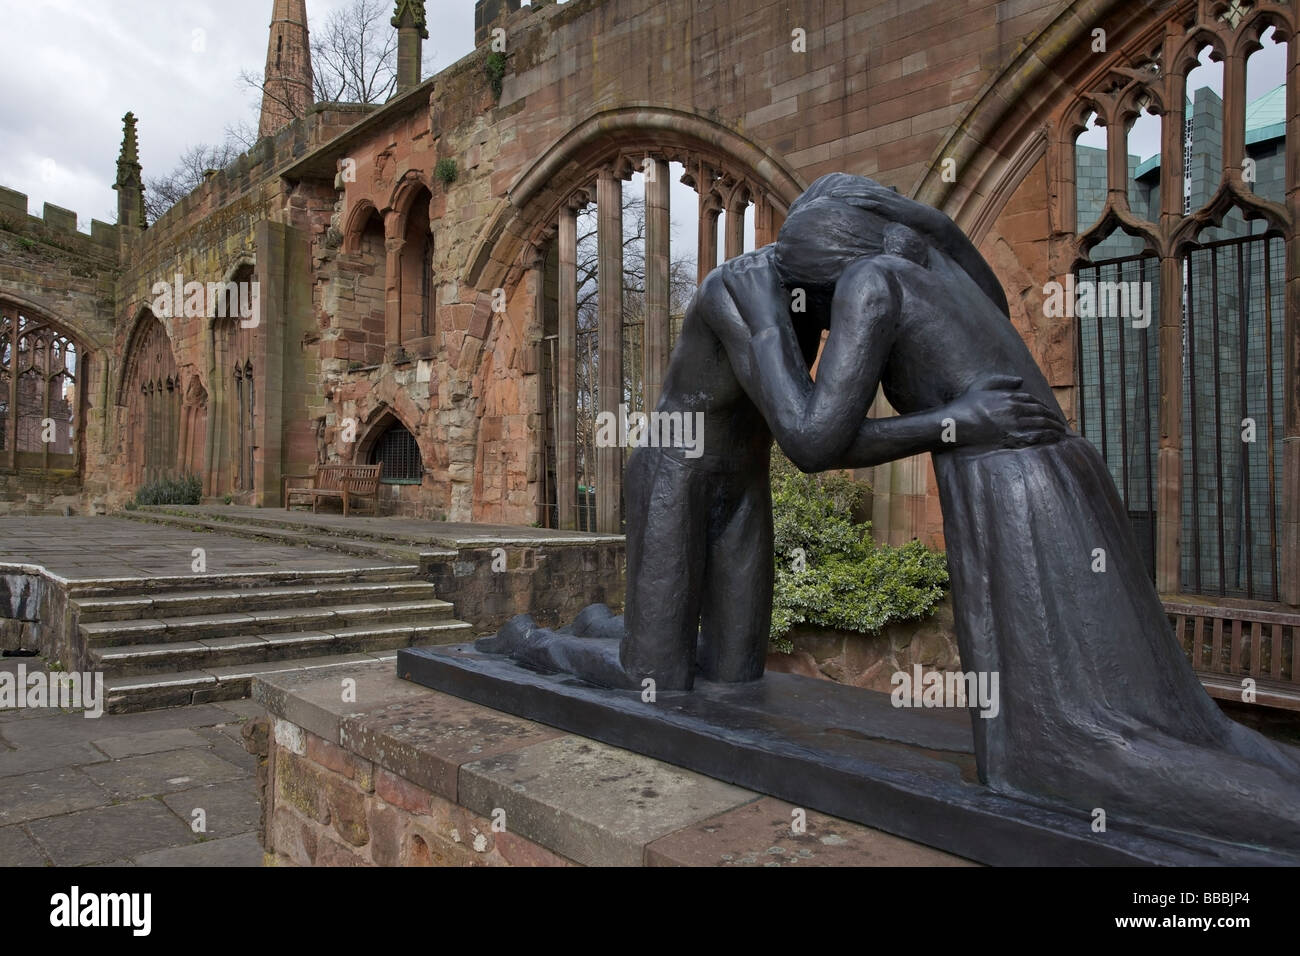 The statue of reconciliation by Josefina de Vasconcellos at The ruins of Coventry Cathedral, West Midlands, United Kingdom Stock Photo